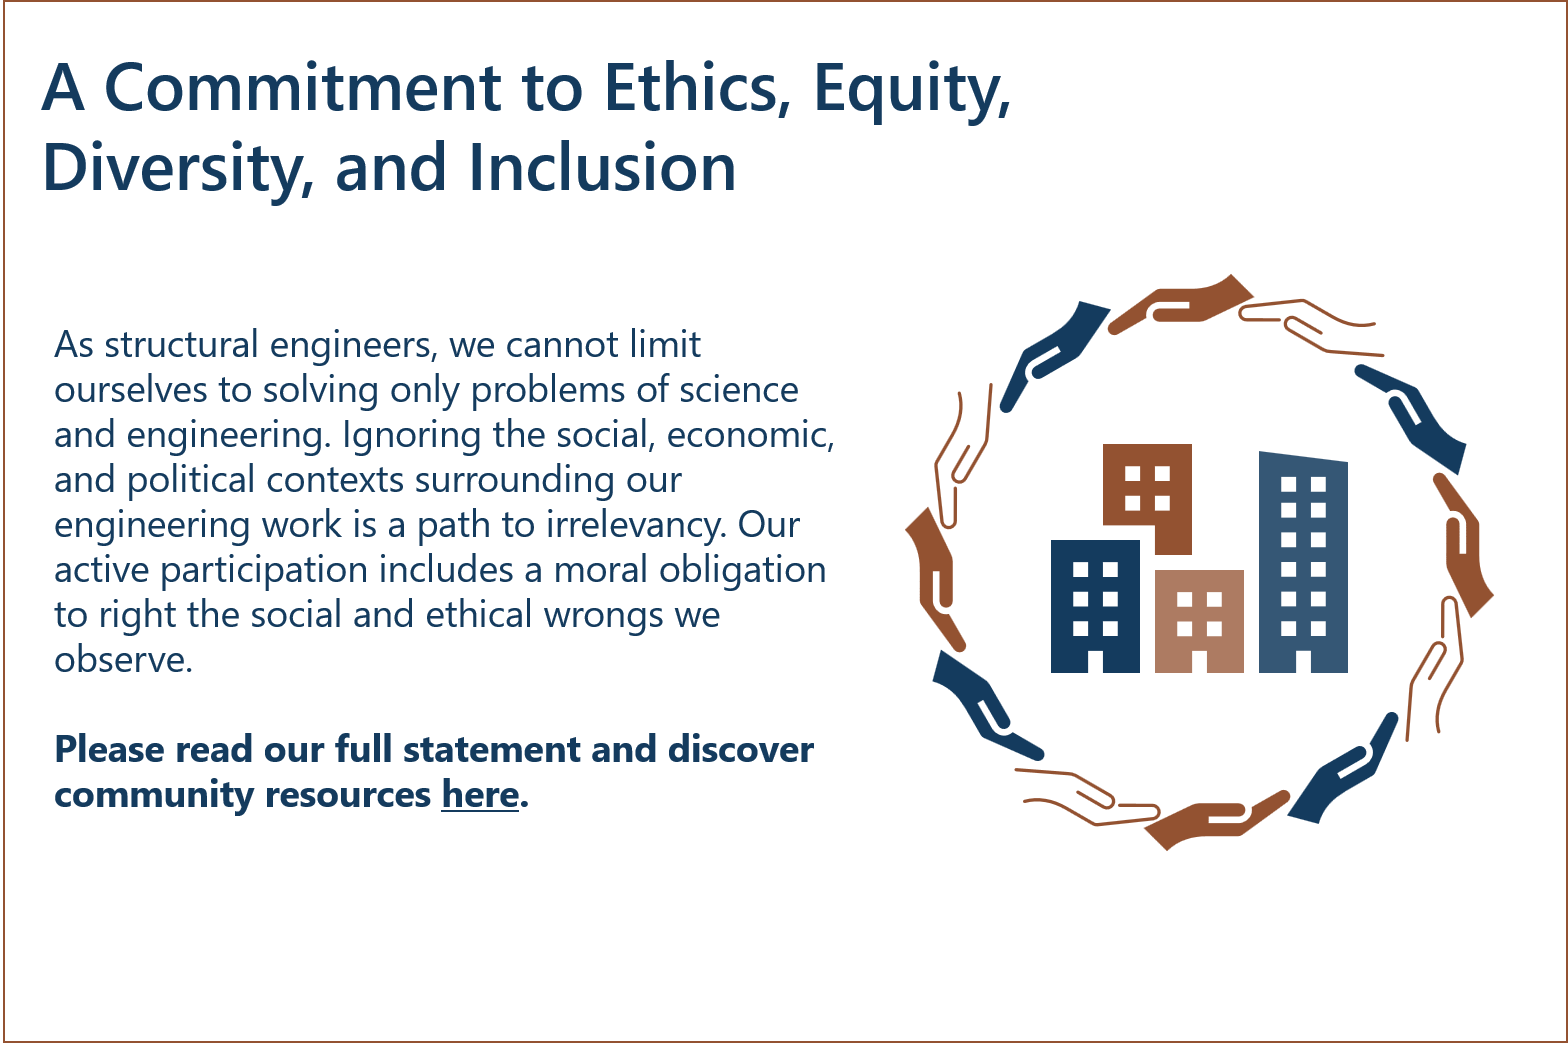 A Commitment to Ethics, Equity, Diversity, and Inclusion